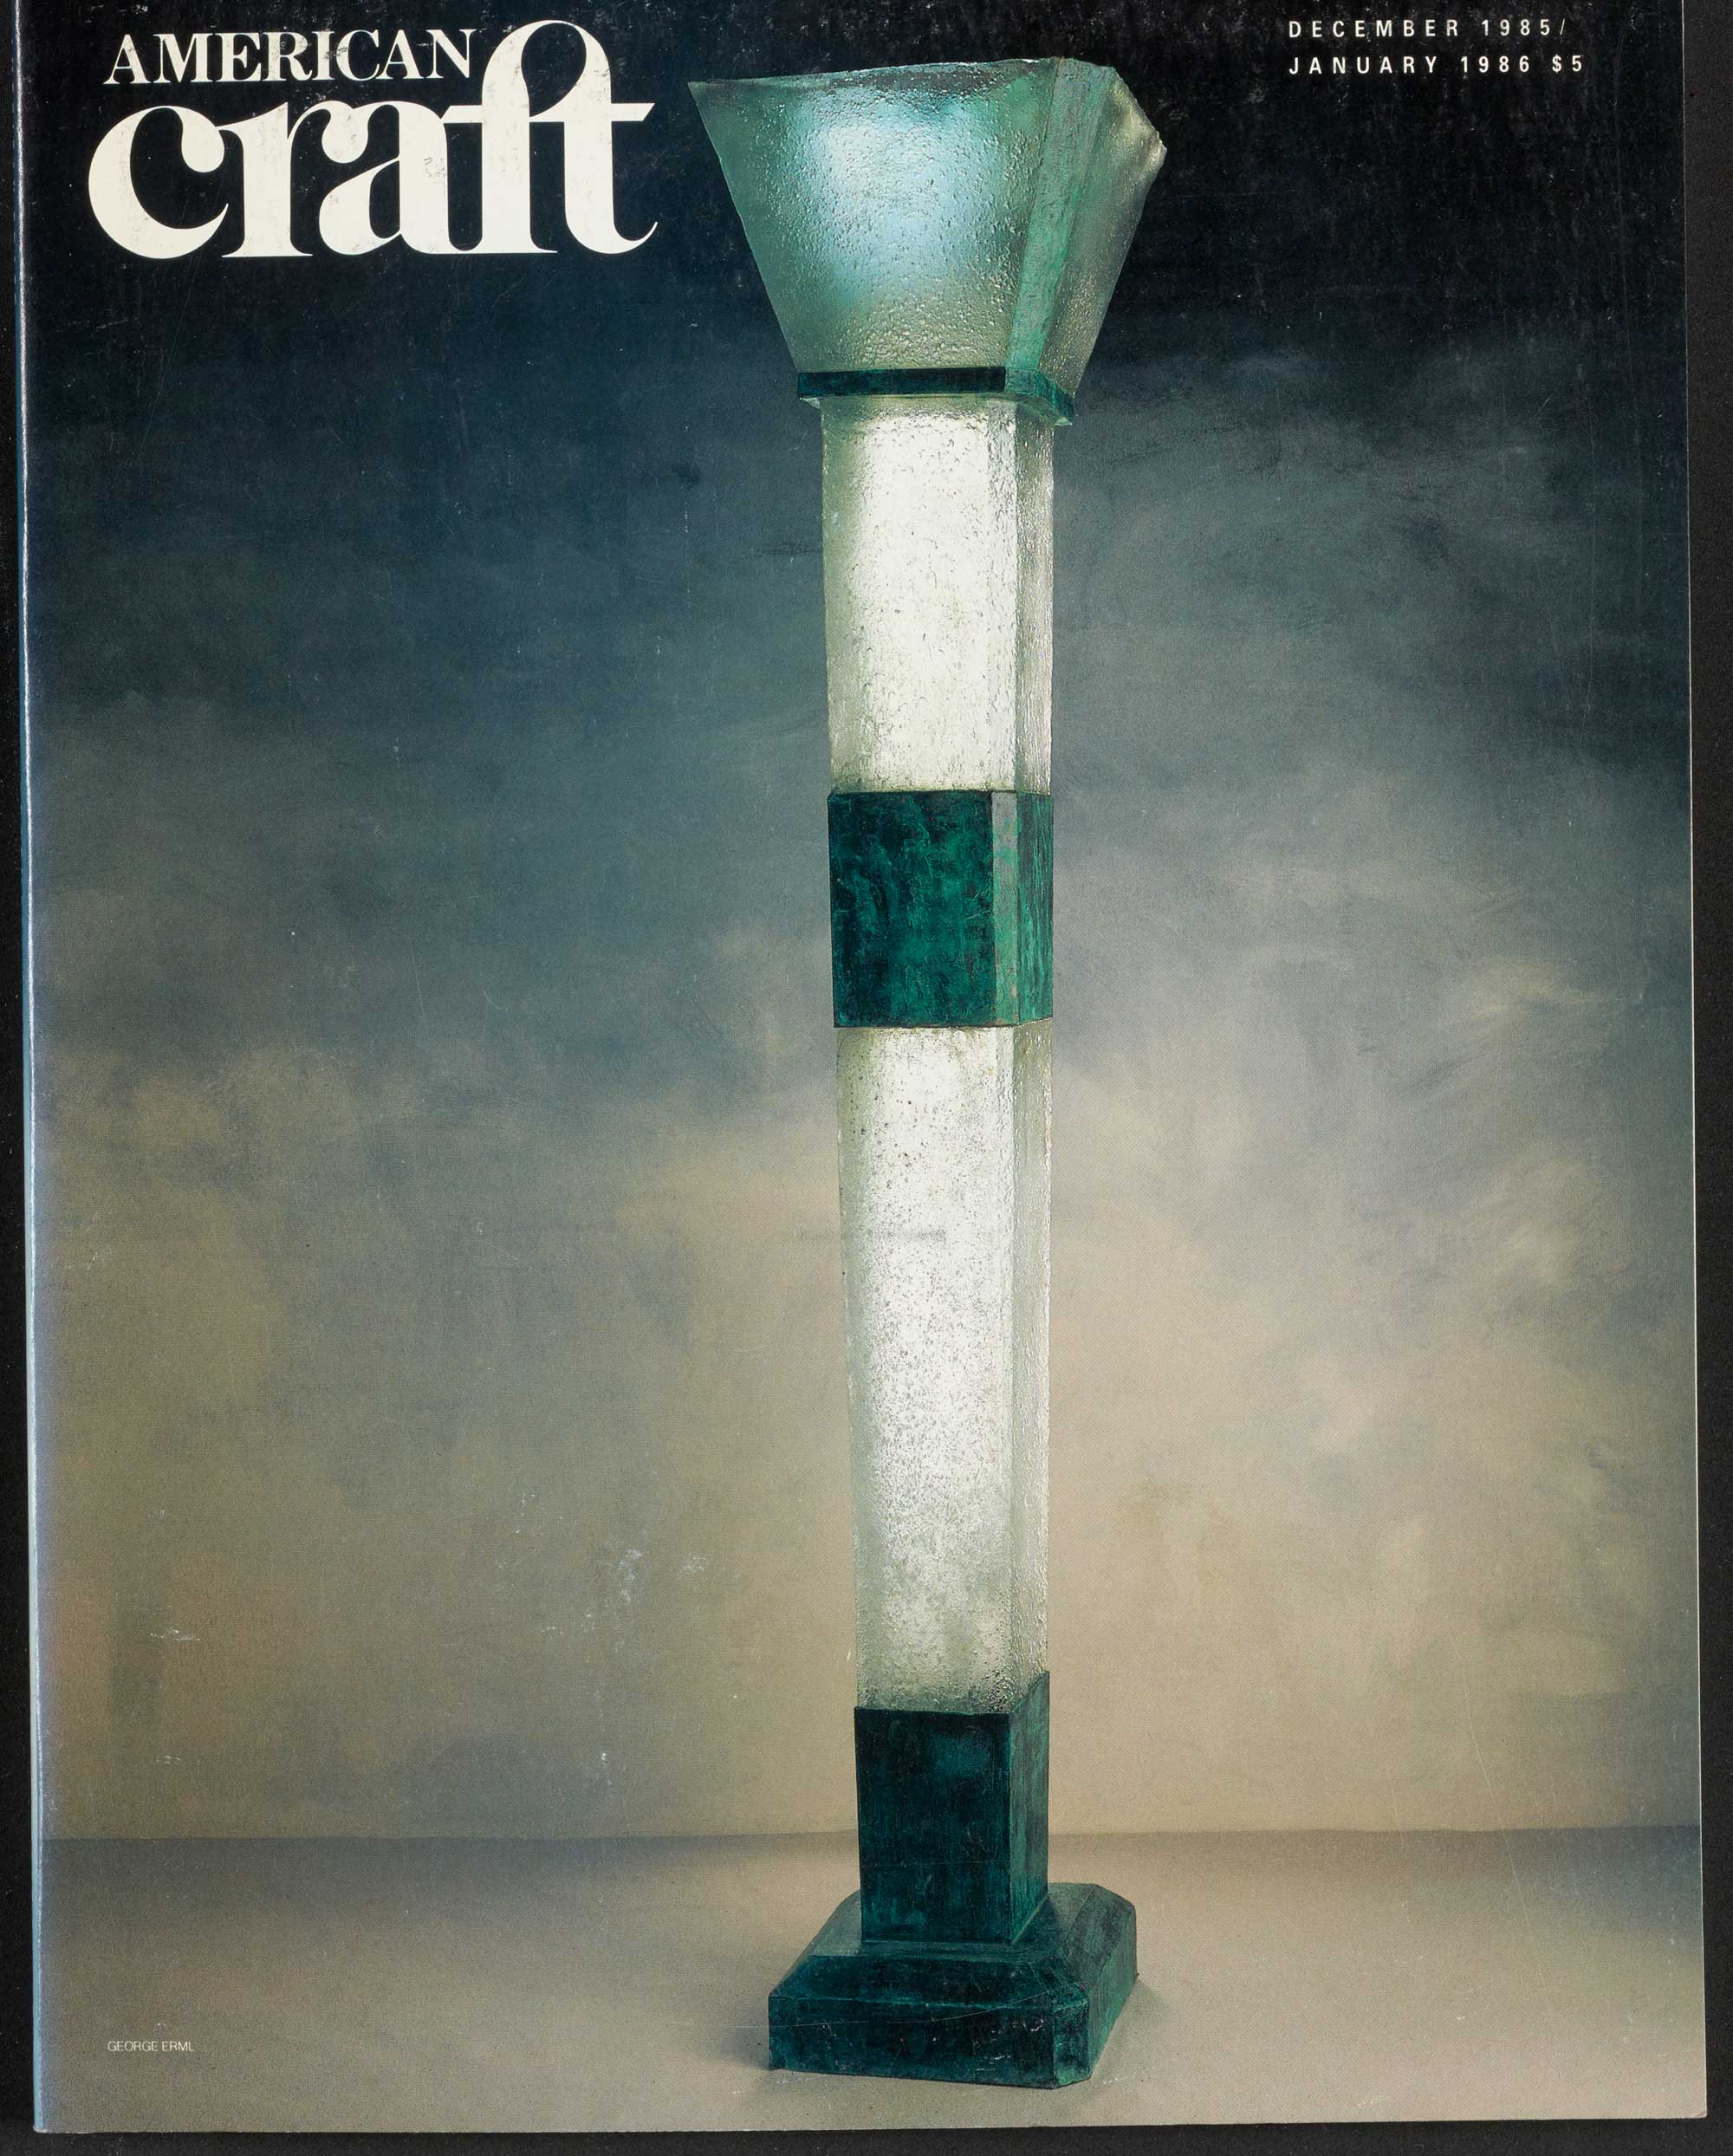 Column 22 by Howard Ben Tré on the cover of American Craft December 1985/January 1986